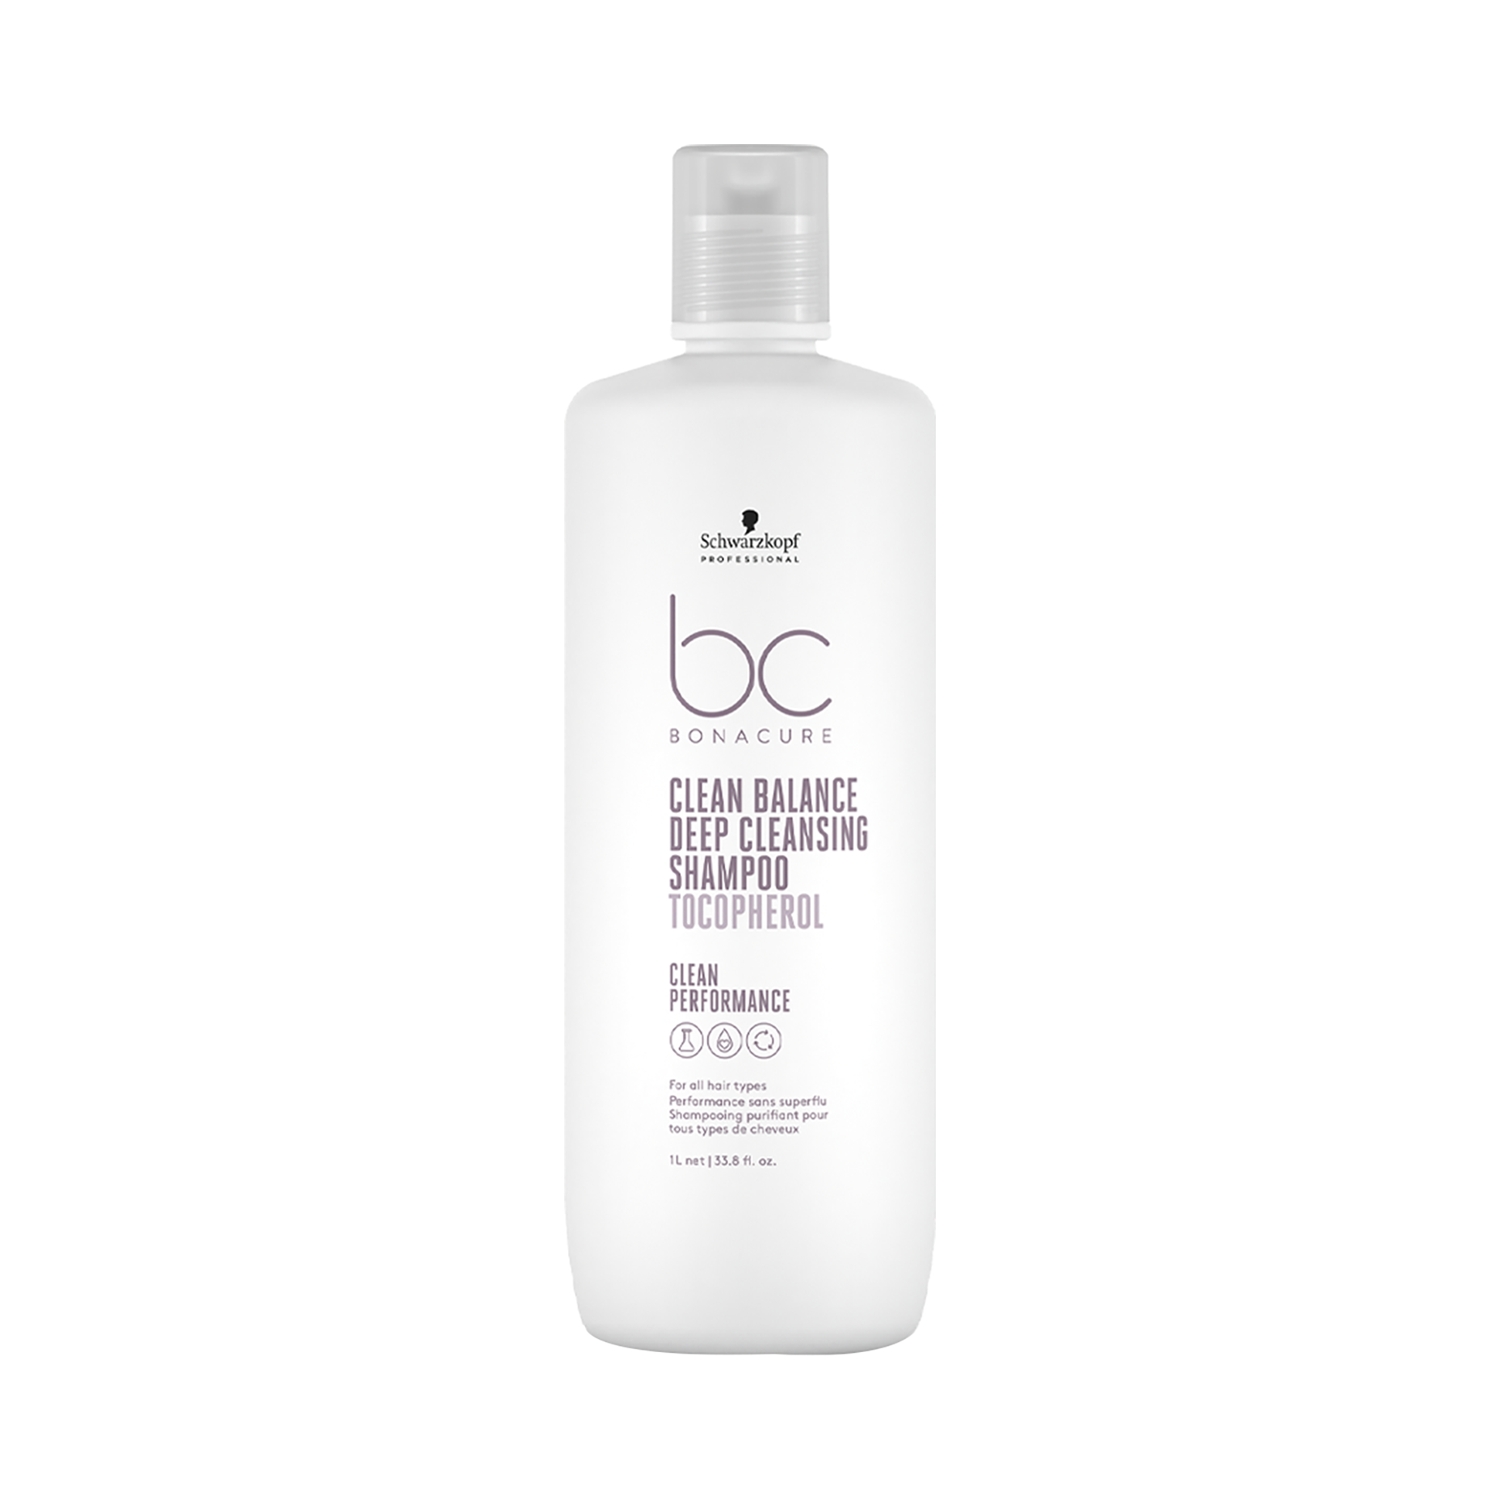 Schwarzkopf Professional | Schwarzkopf Professional Bonacure Clean Balance Deep Cleansing Shampoo With Tocopherol (1000ml)